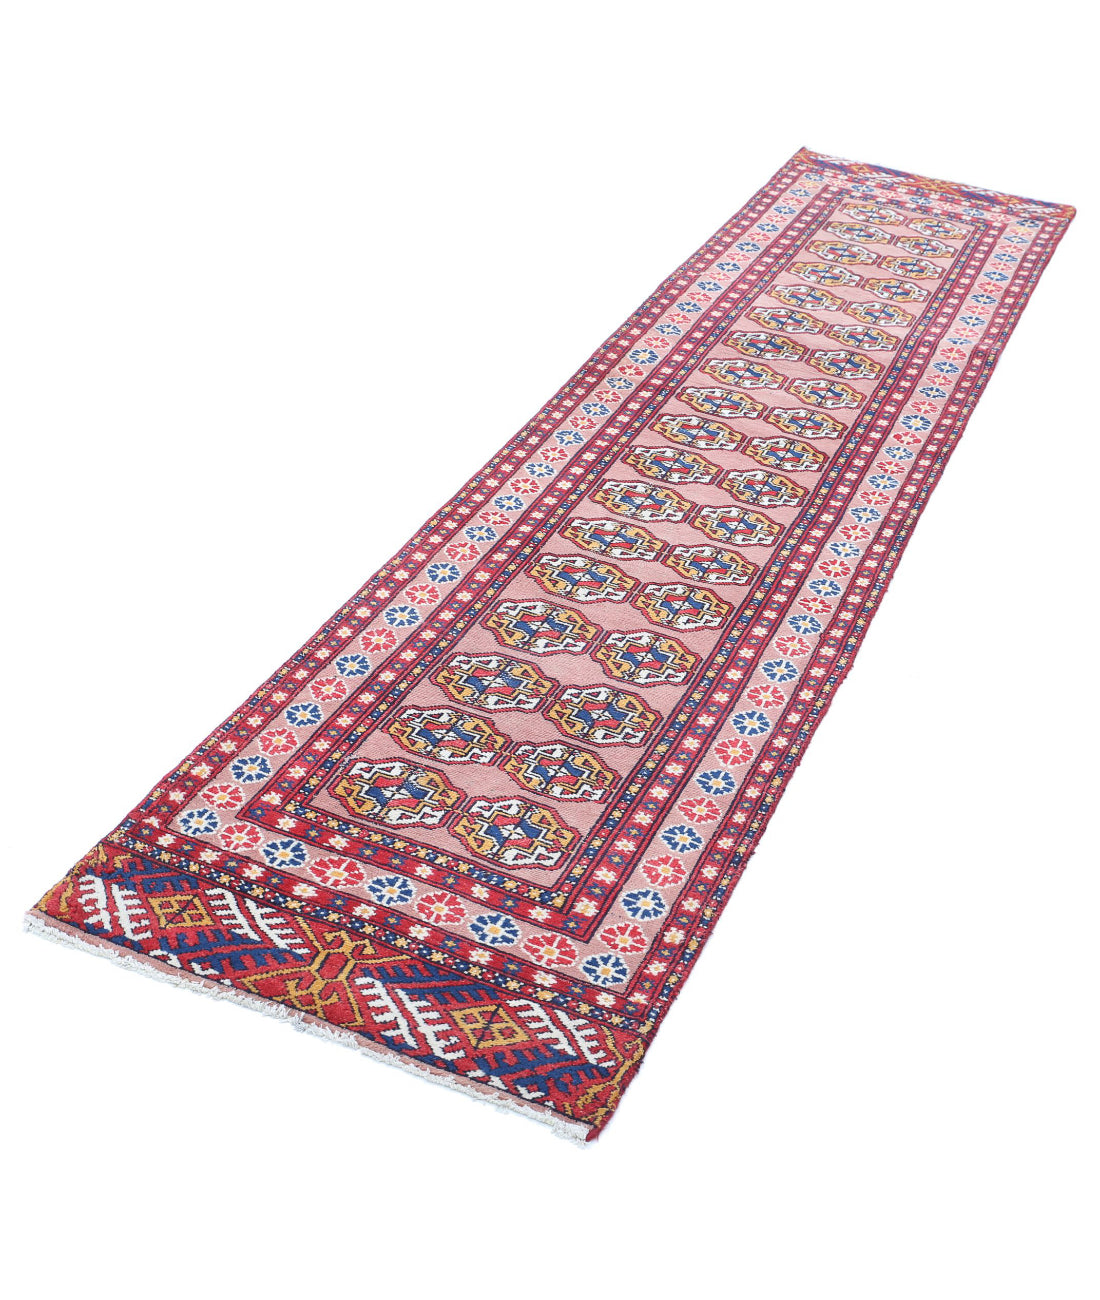 Hand Knotted Tribal Bokhara Wool Rug - 2'4'' x 9'11'' 2'4'' x 9'11'' (70 X 298) / Peach / Red